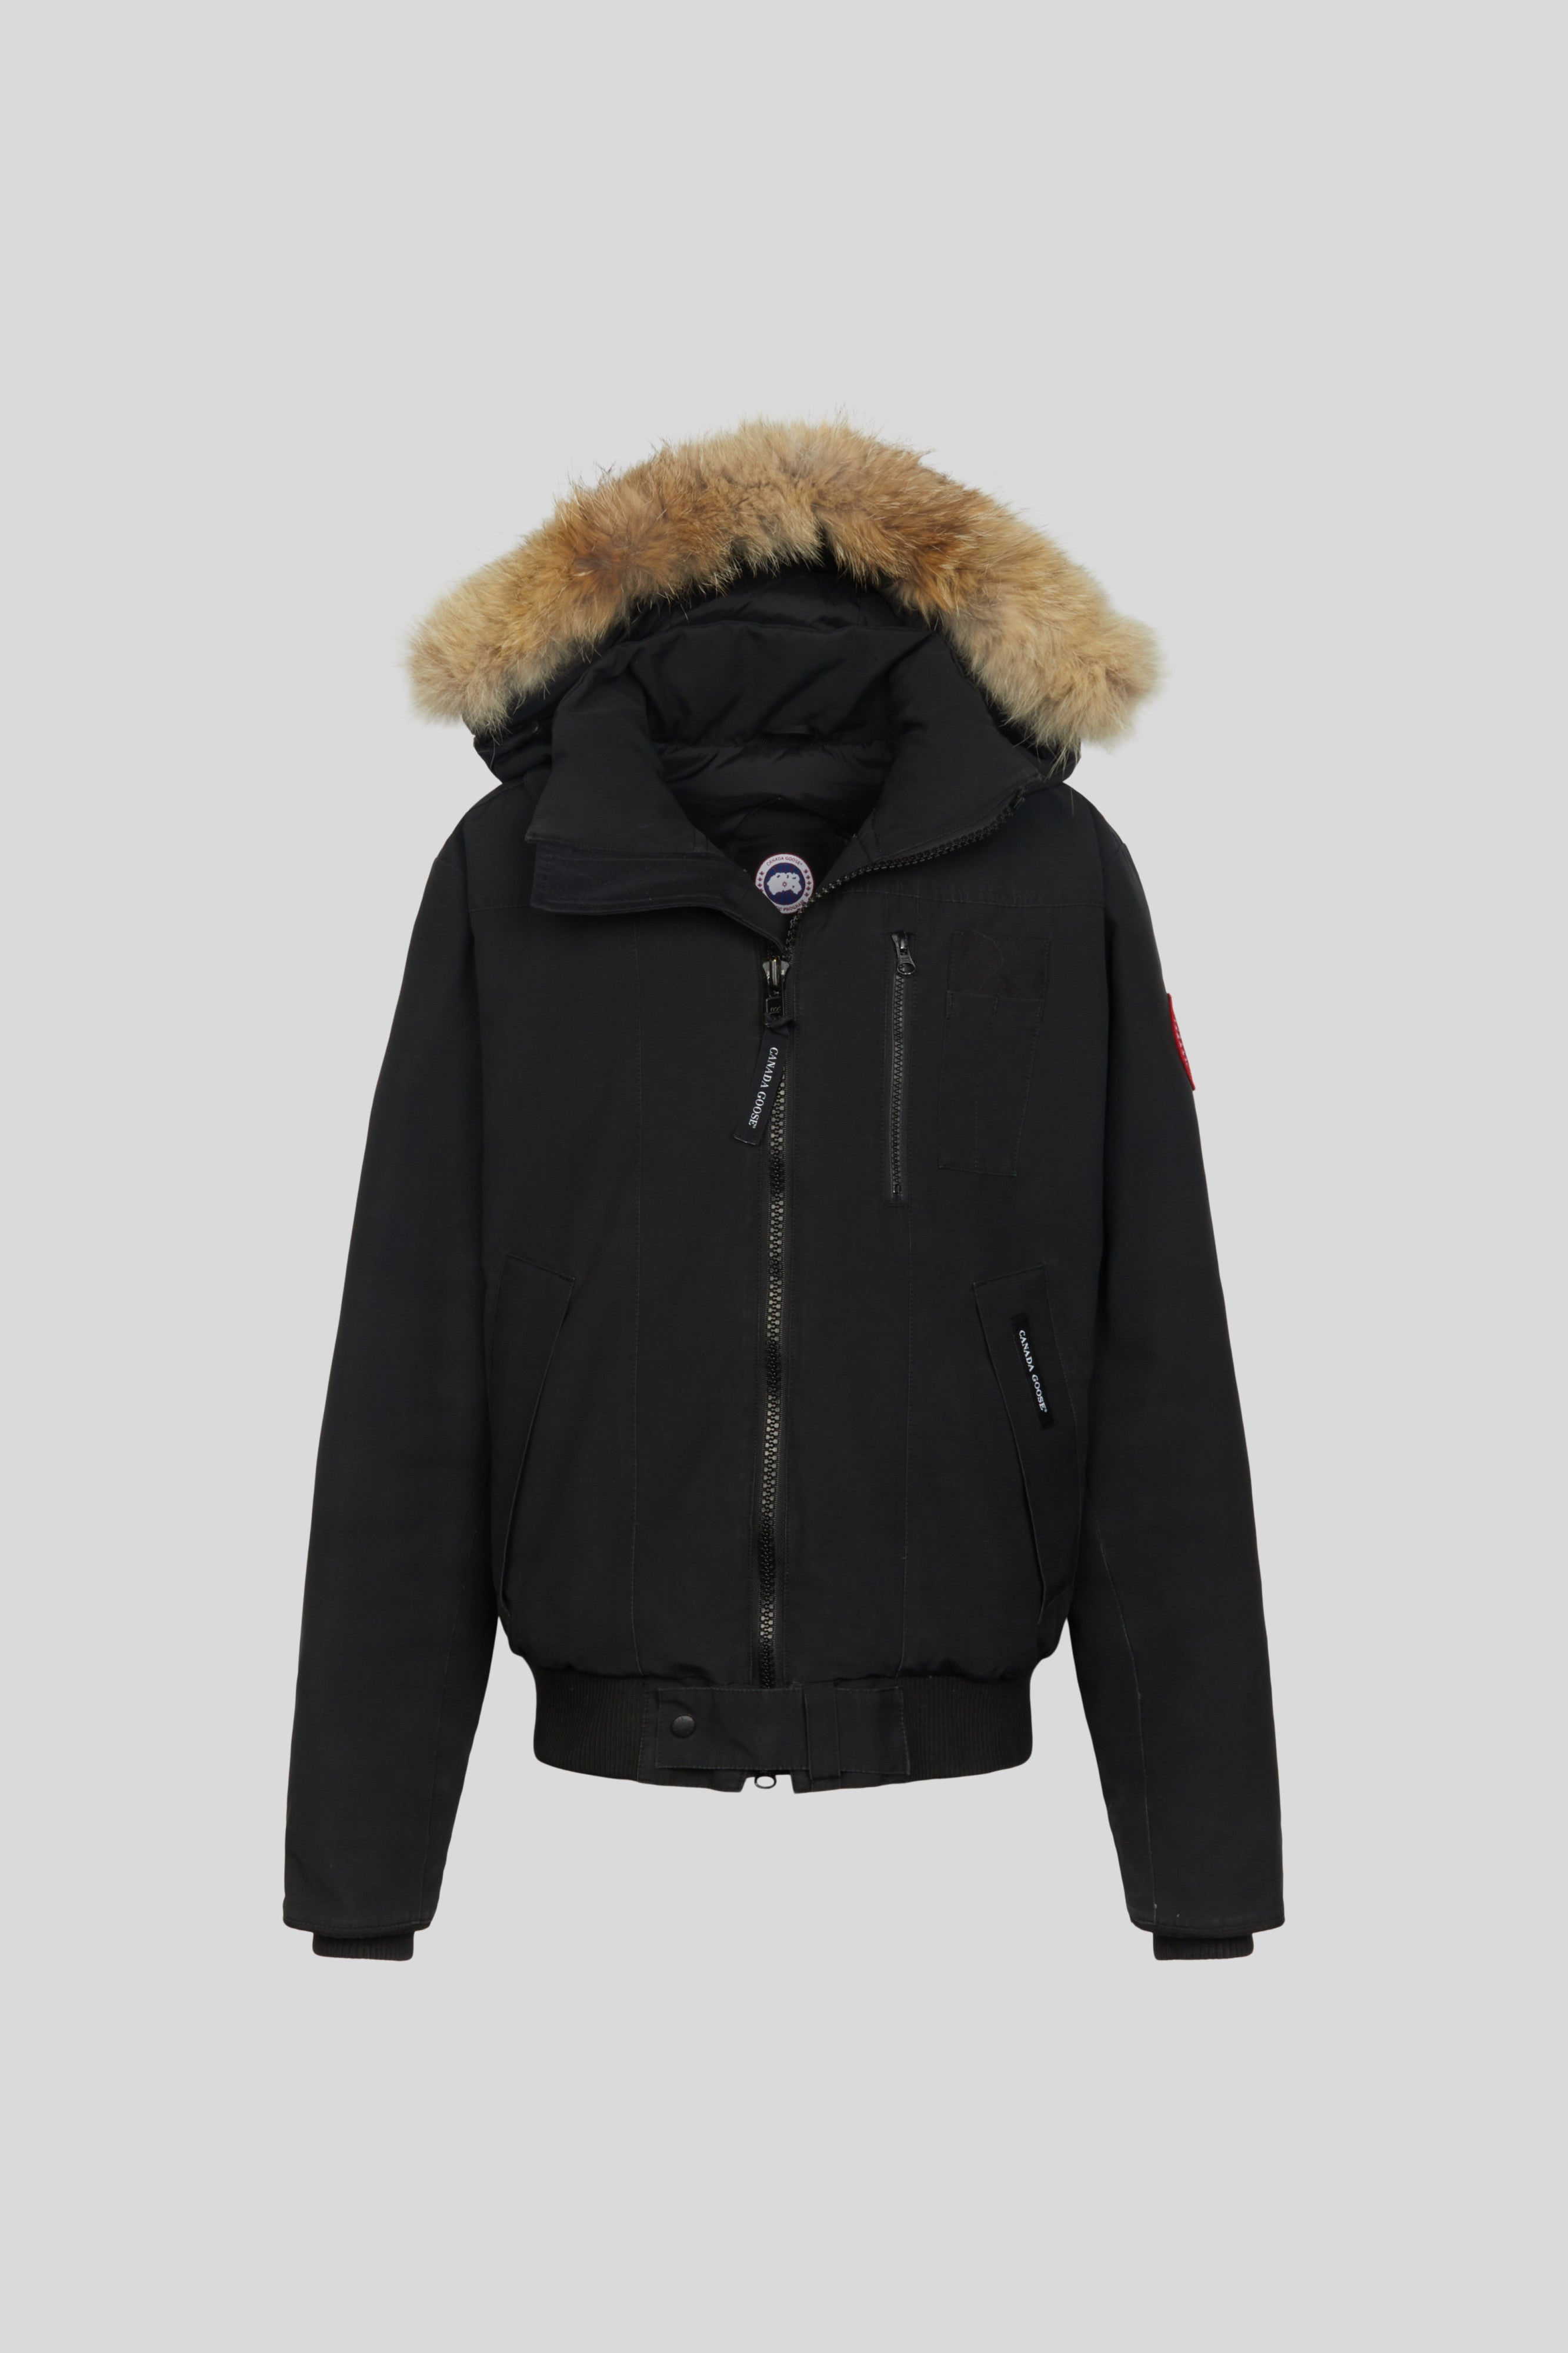 Used Men's Winter Coats, Jackets & Outerwear | Canada Goose